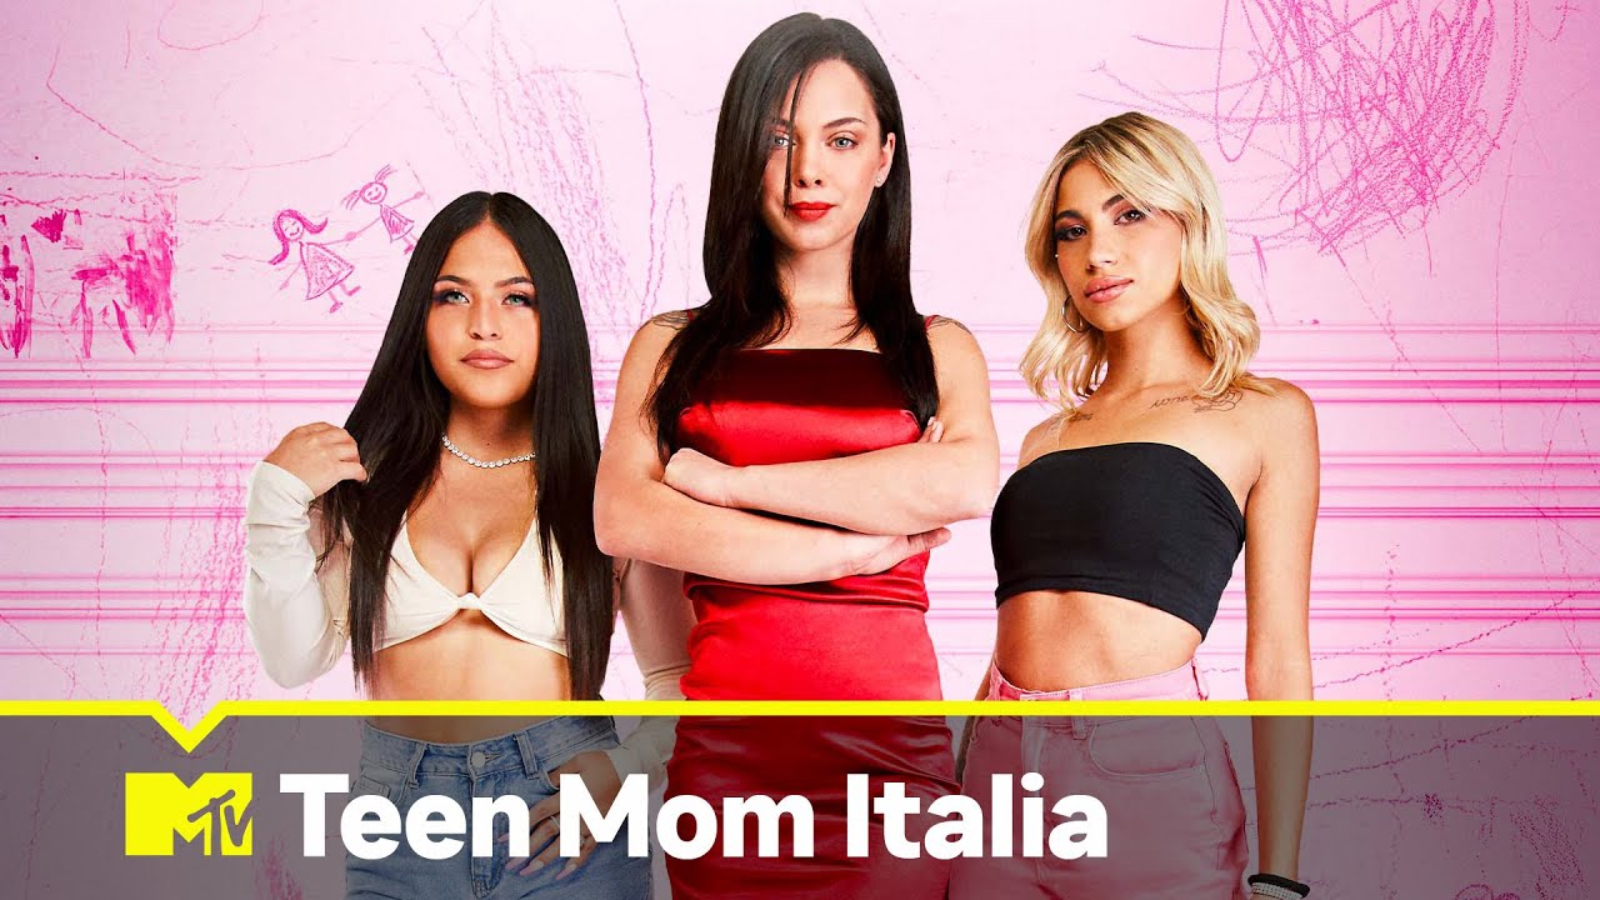 Teen Mom Italia: on MTV the marathon of all the episodes for Mother's Day